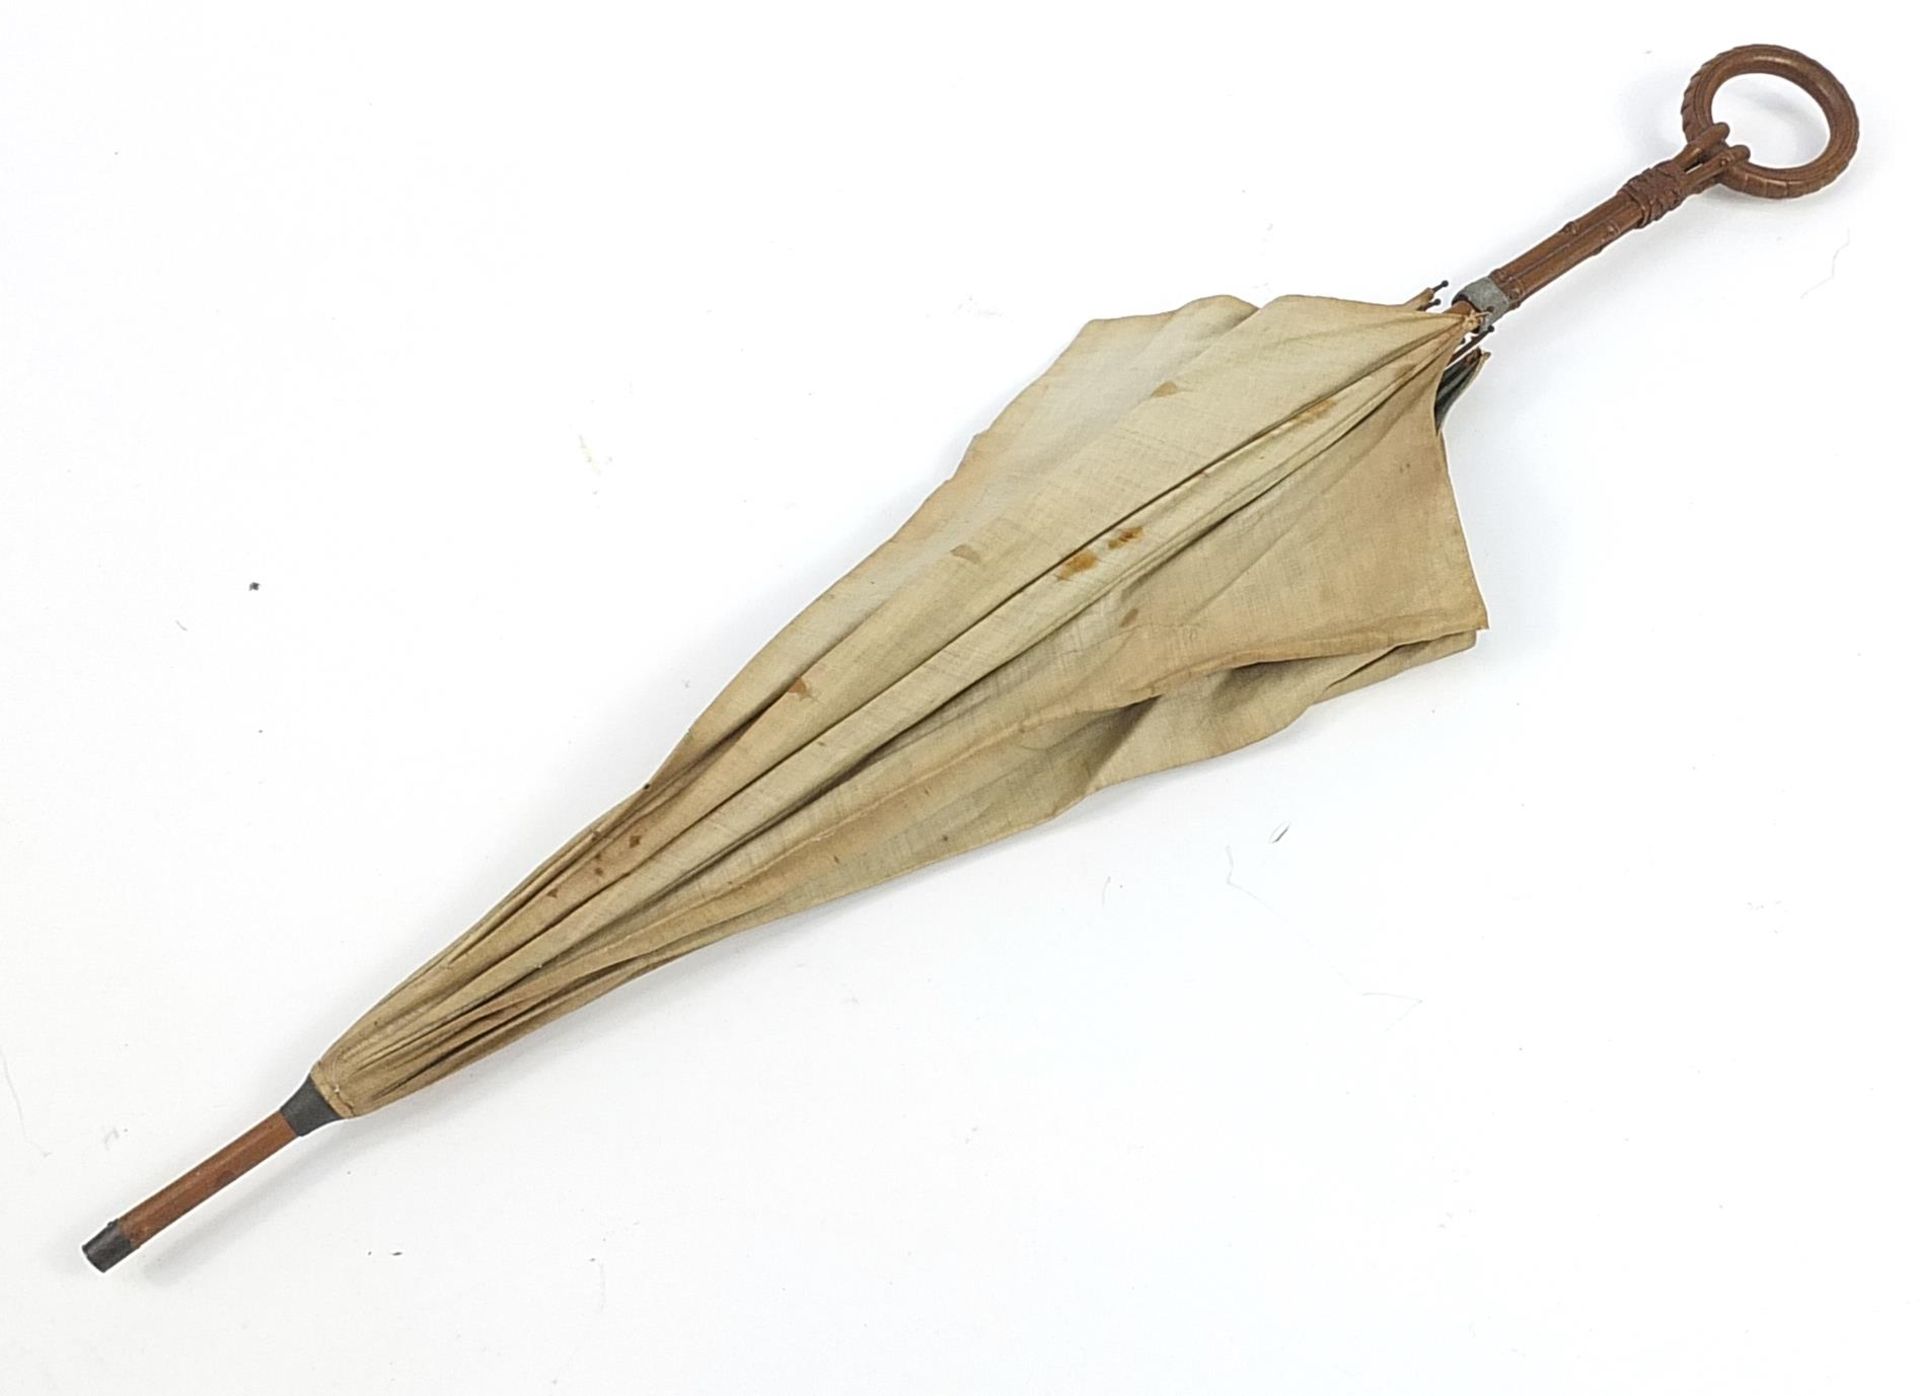 Black forest parasol with carved bamboo design handle, 87cm in length - Image 2 of 4